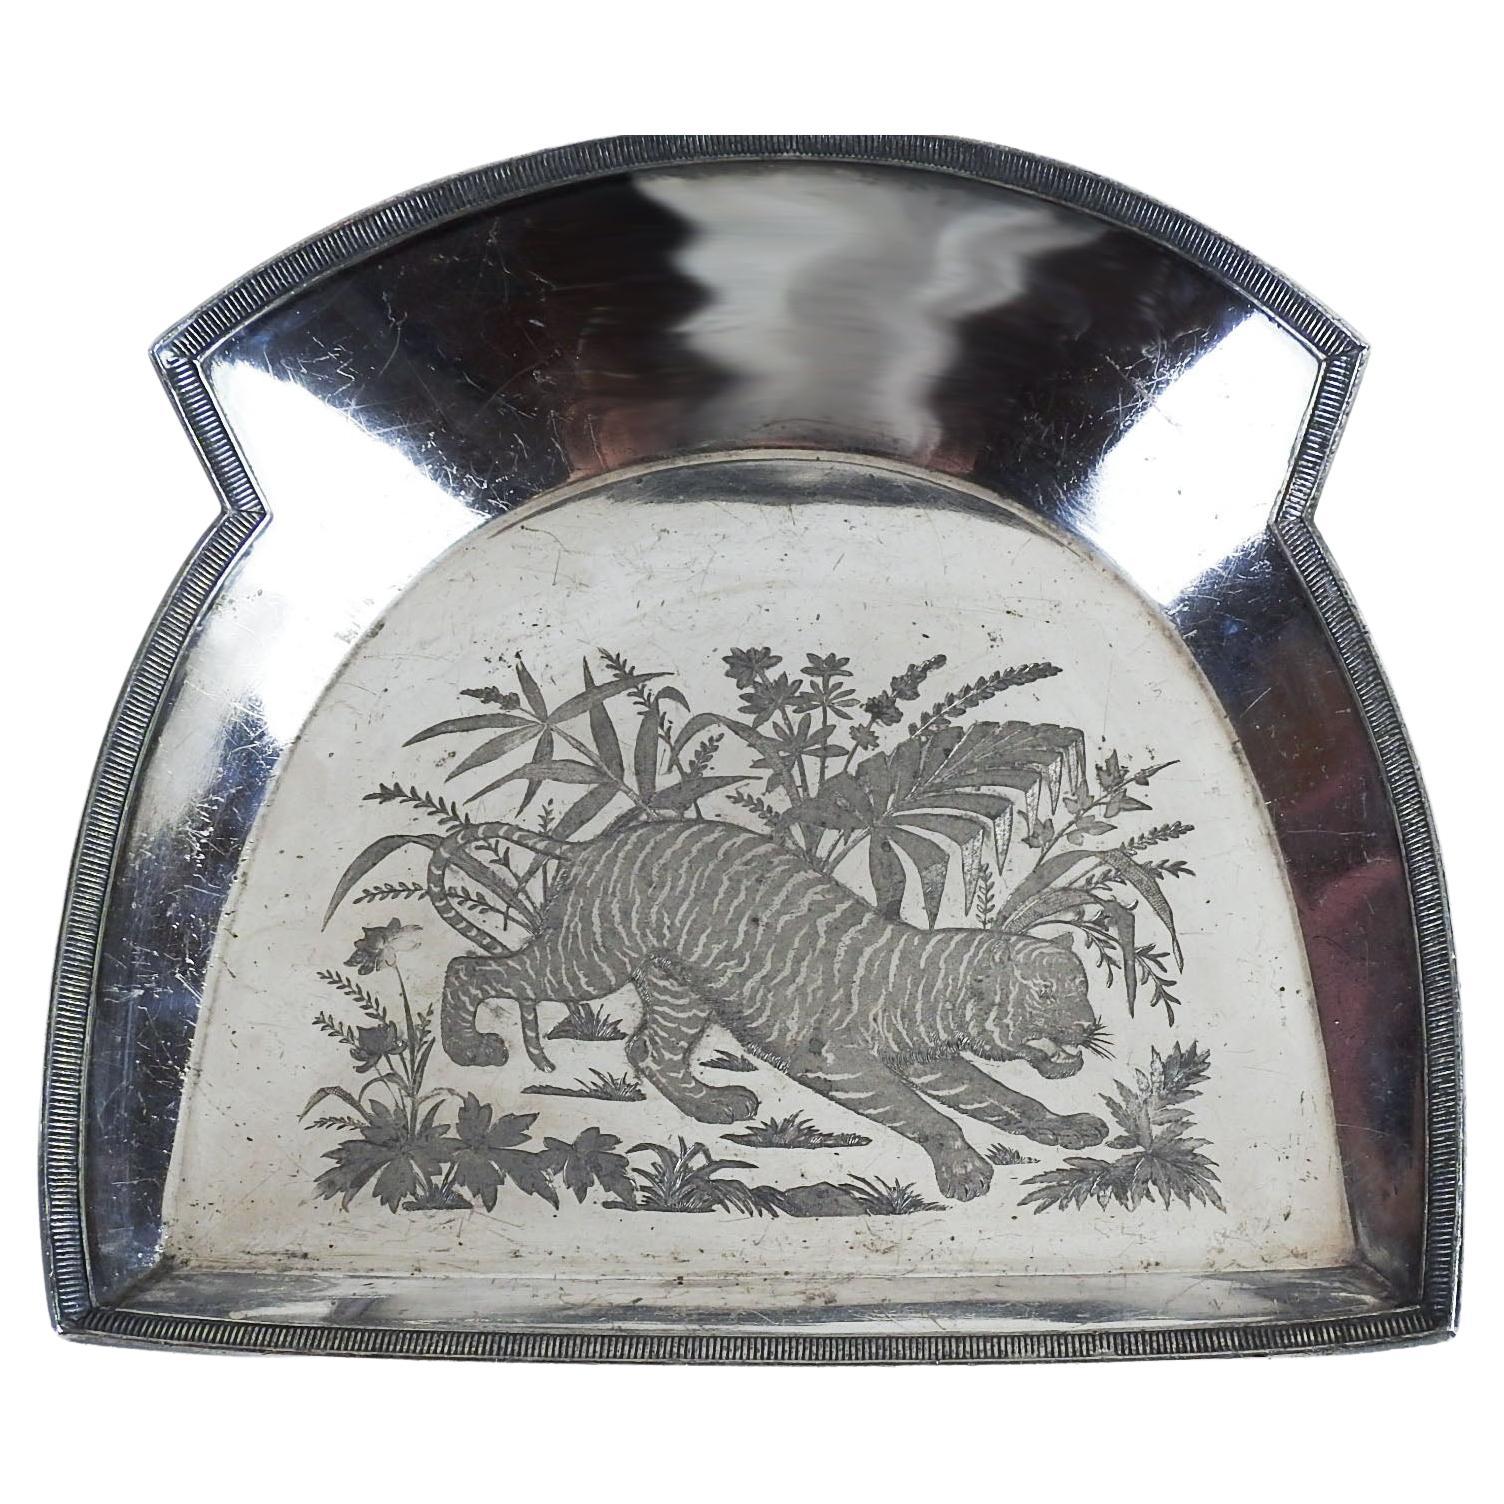 Antique Silverplate Aesthetic Tiger Tray